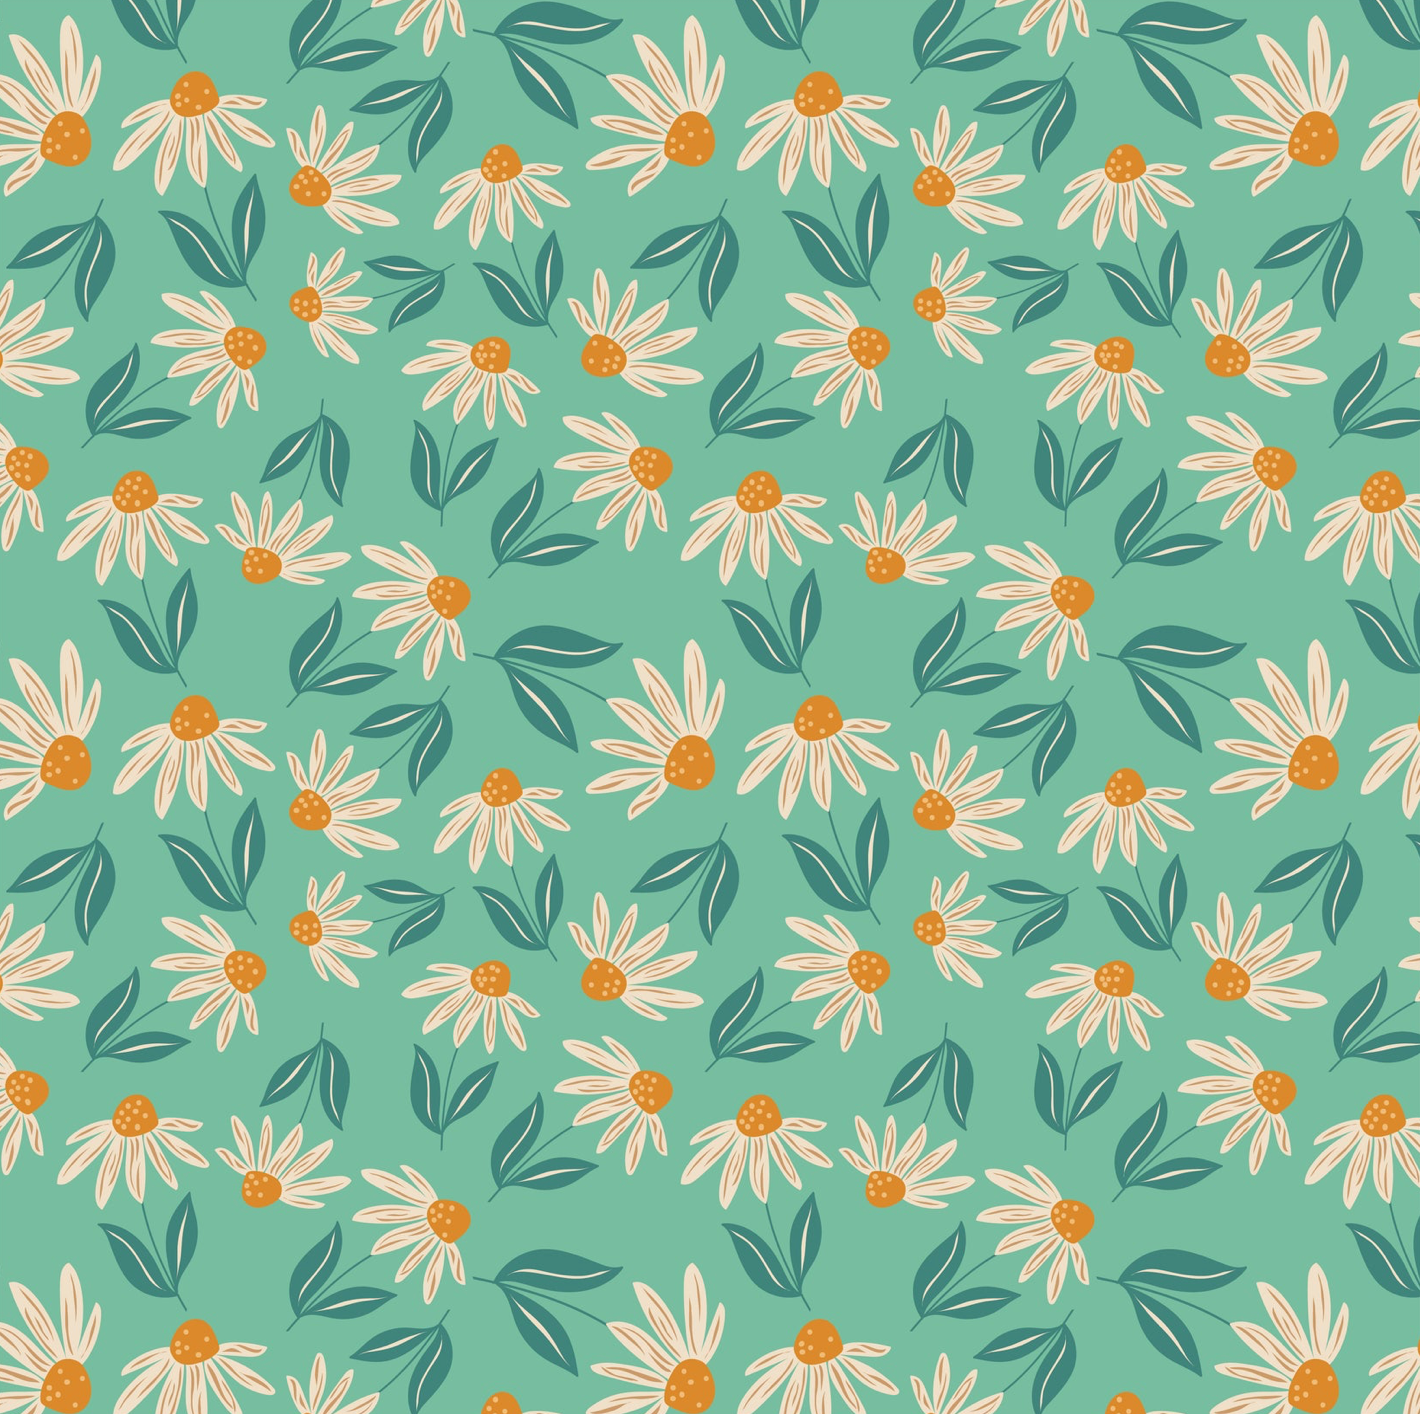 Calico Cowgirls, Big Sunnies Teal, CW24829, sold by 1/2 yard, *PREORDER